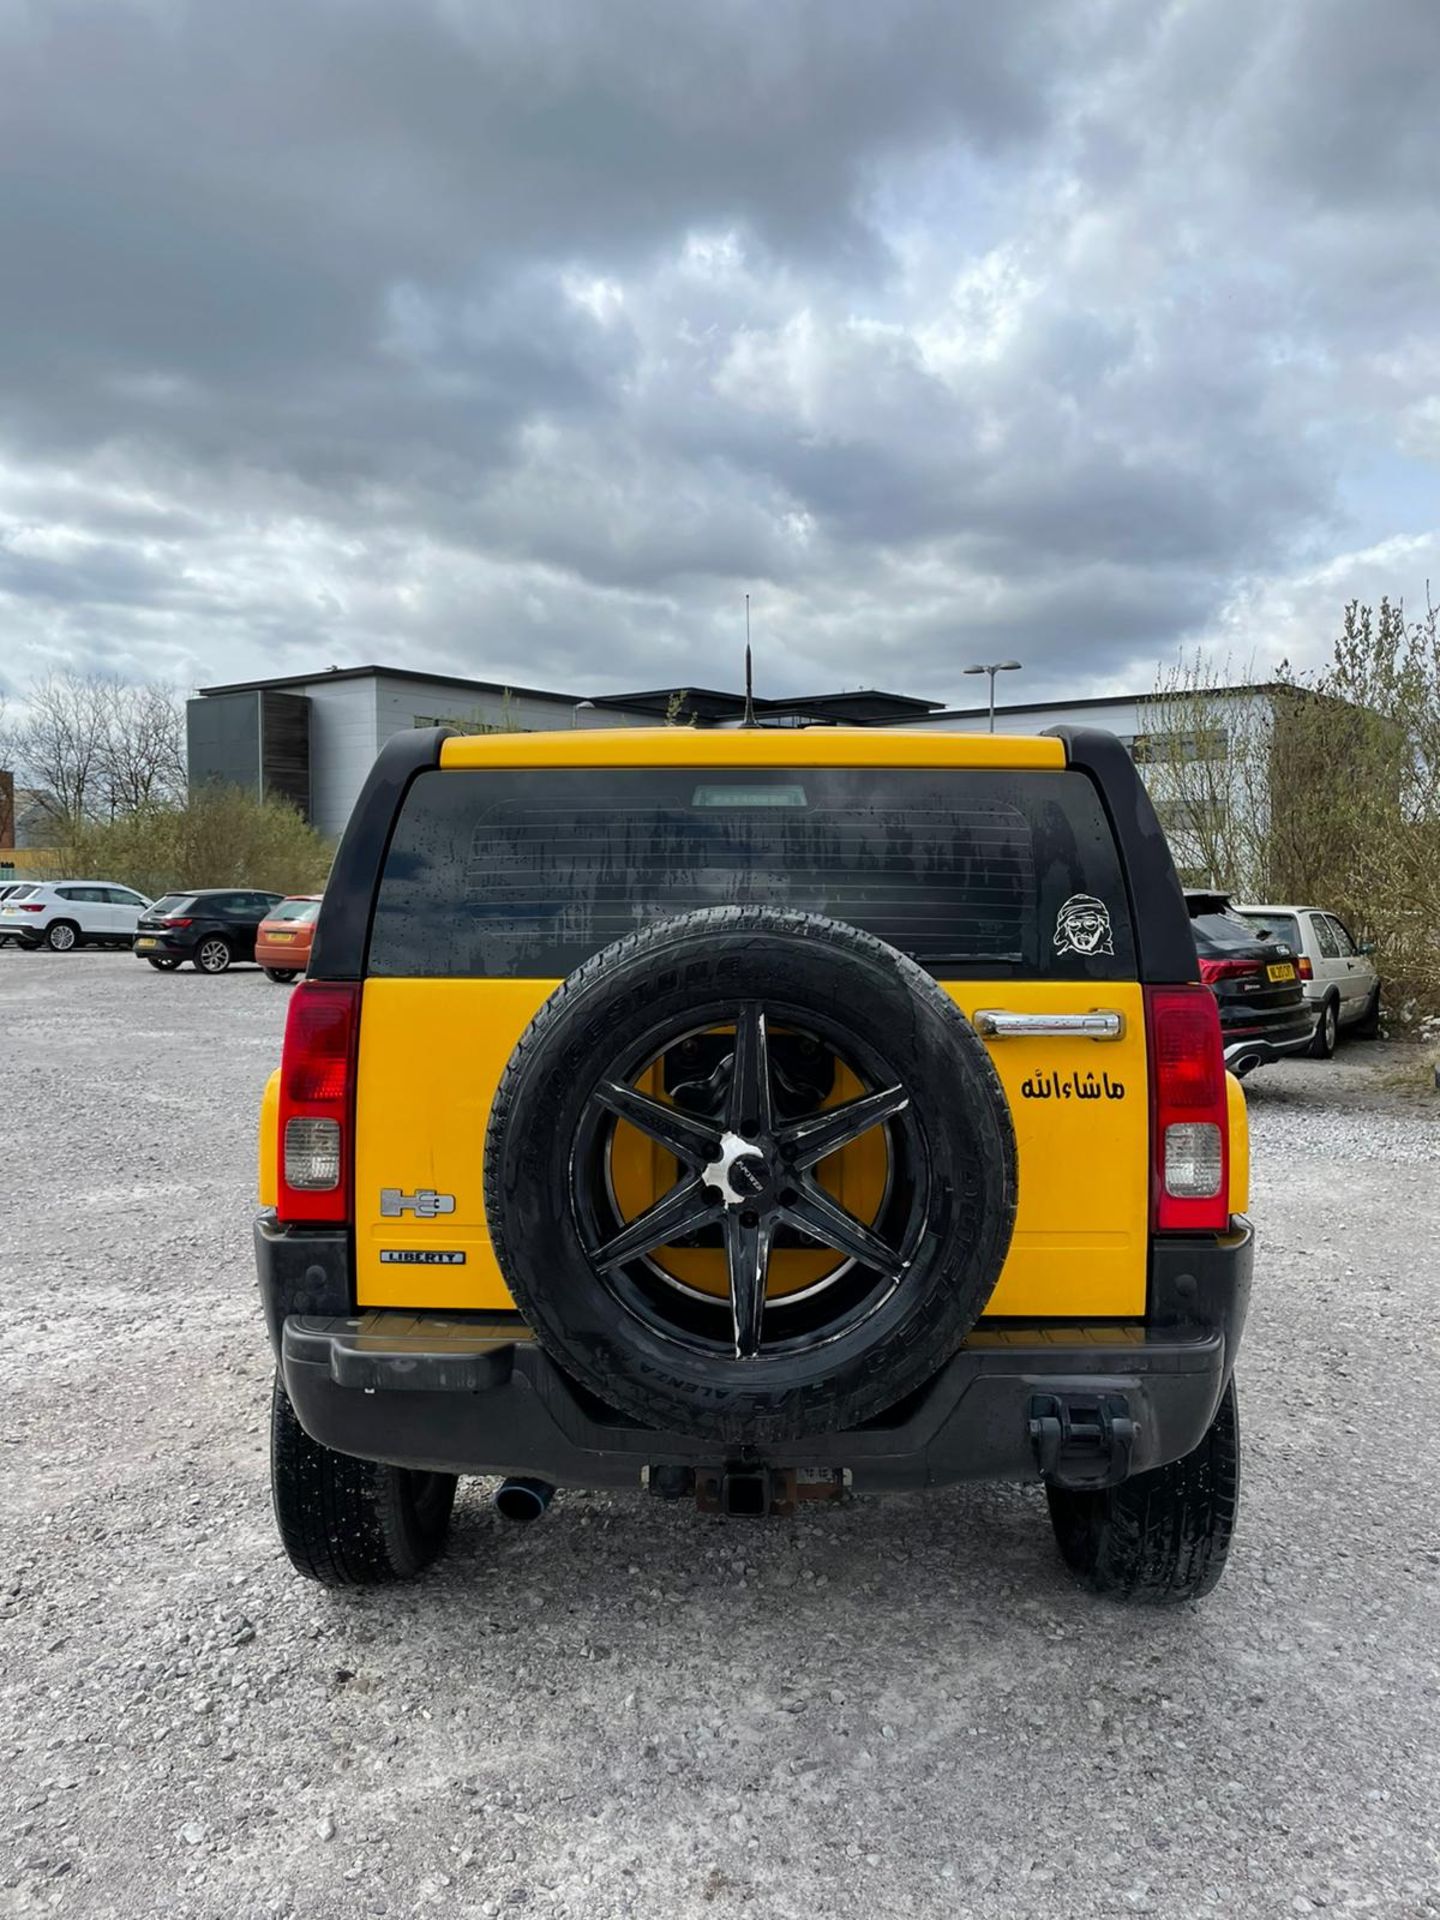 2006 HUMMER H3, 65,000 MILES, WITH NOVA READY TO GO *PLUS VAT* - Image 4 of 10